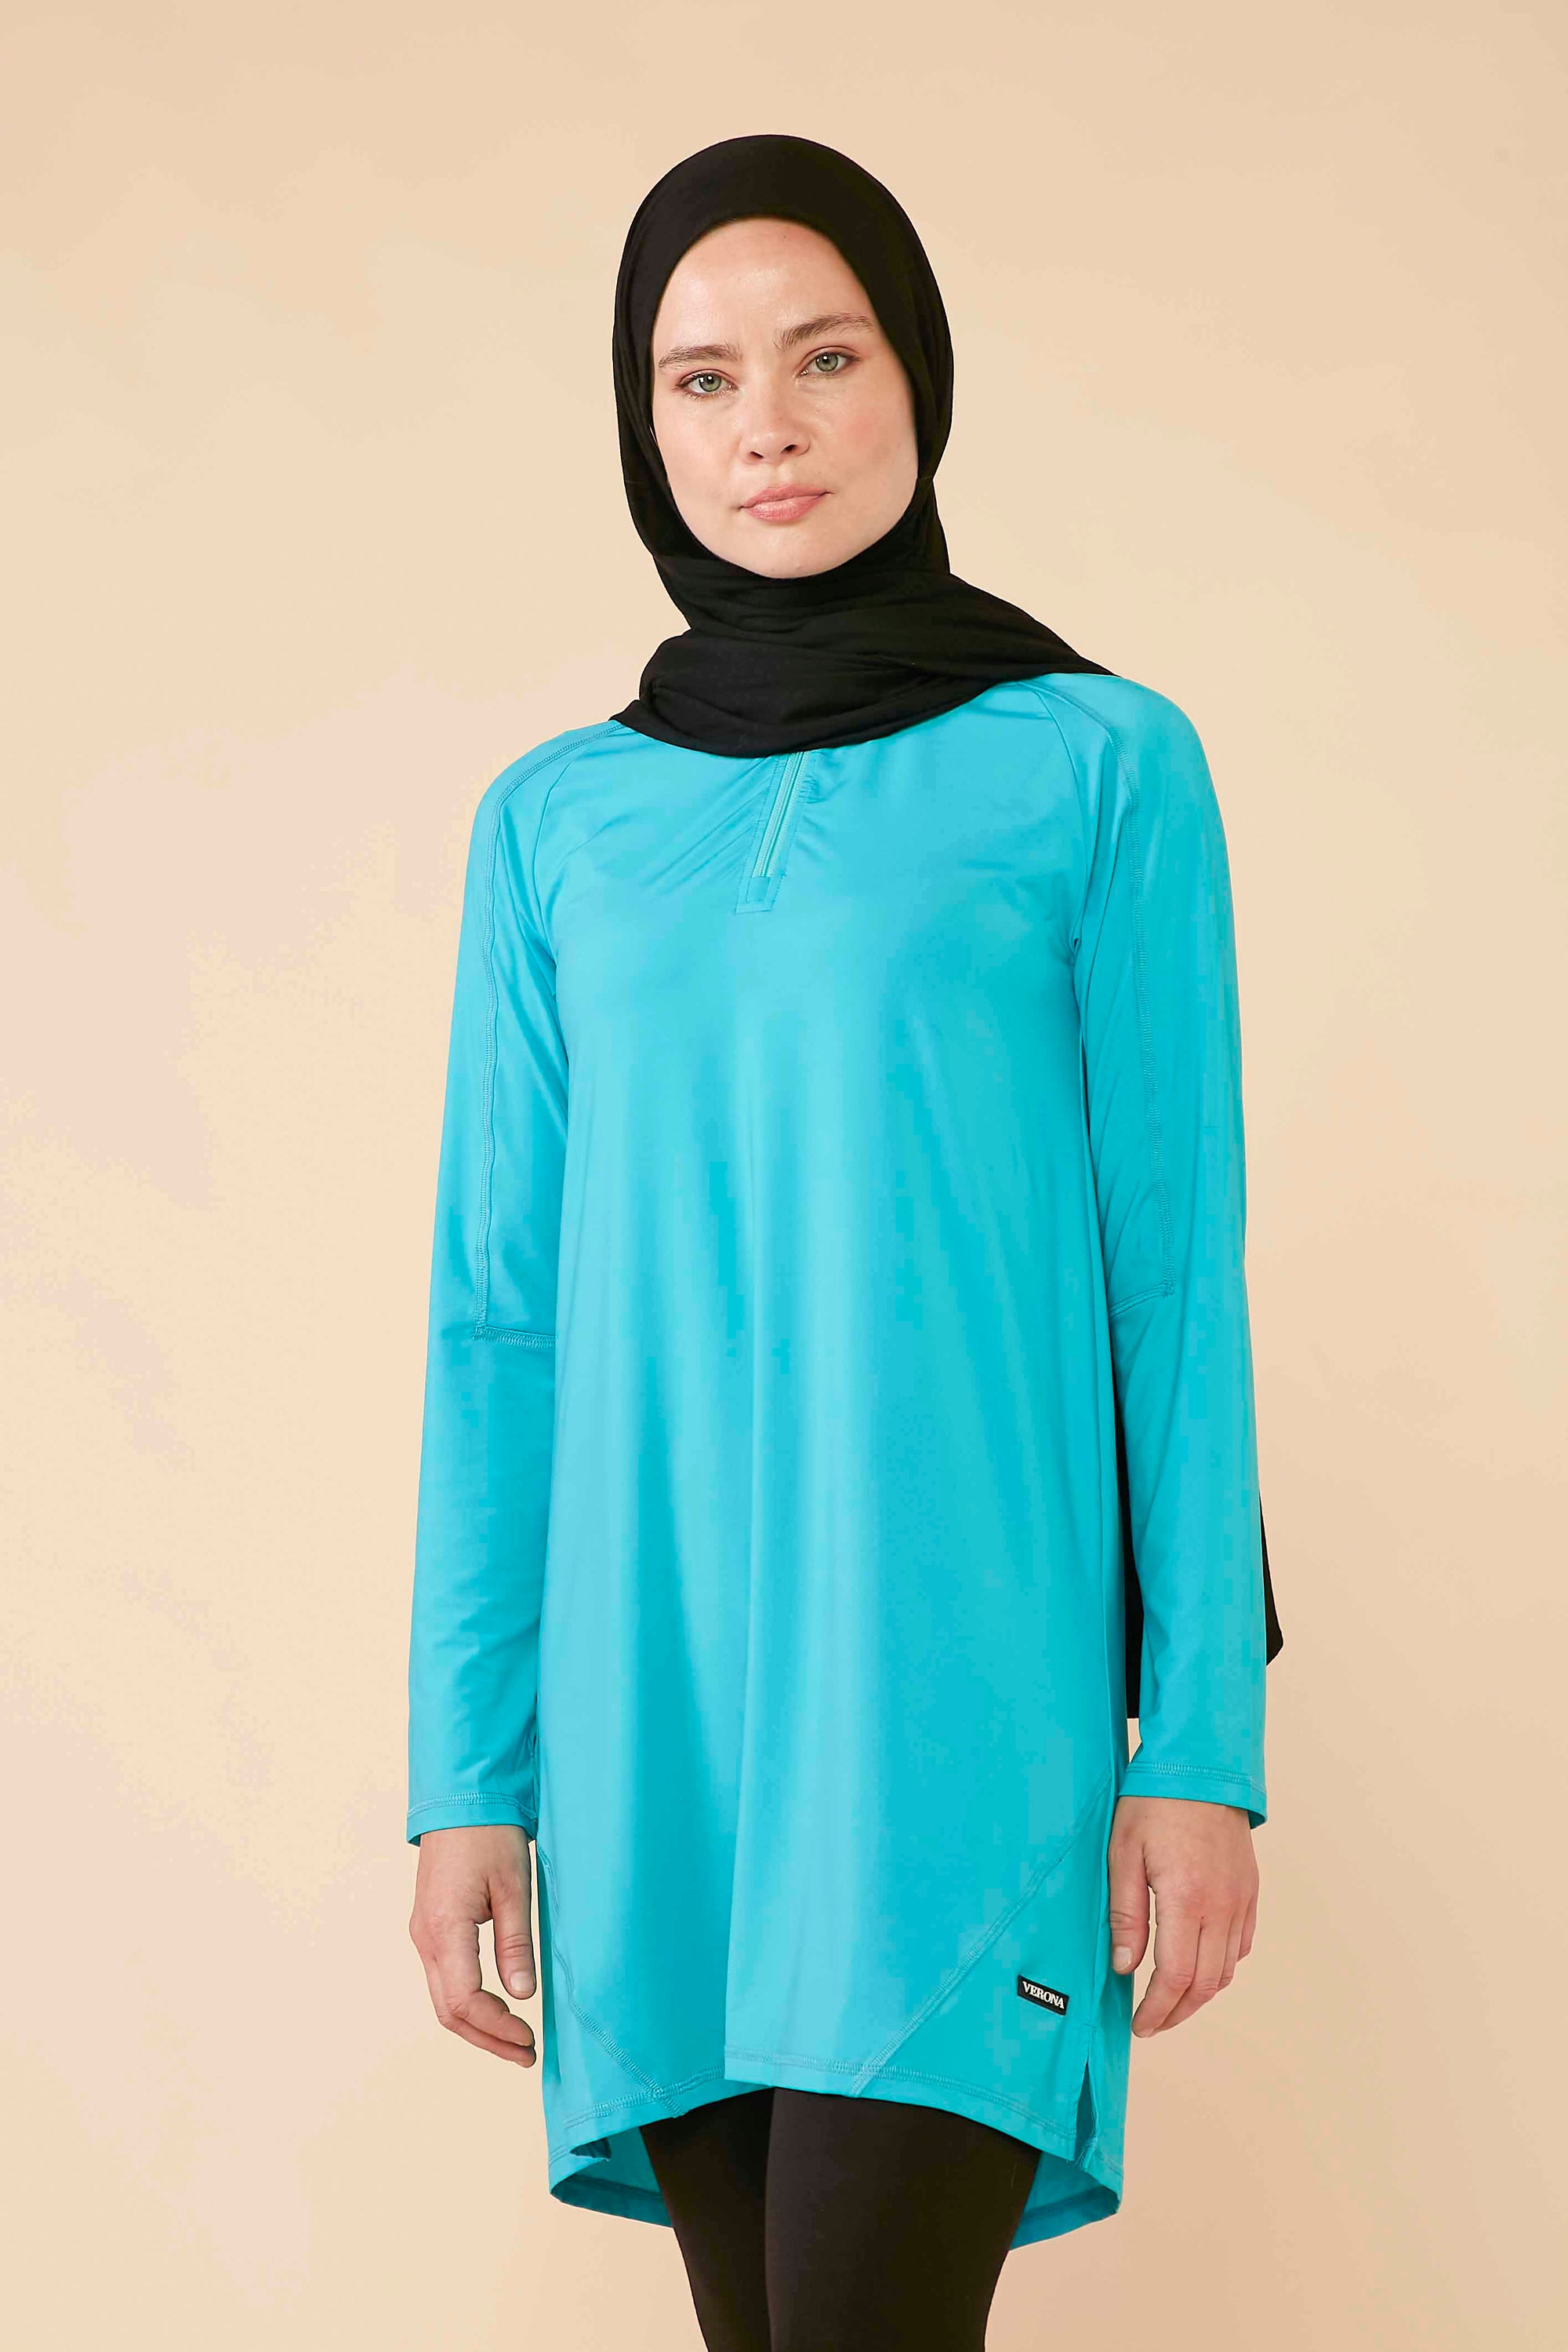 Isabella Modest Athletic Top - Sea Blue